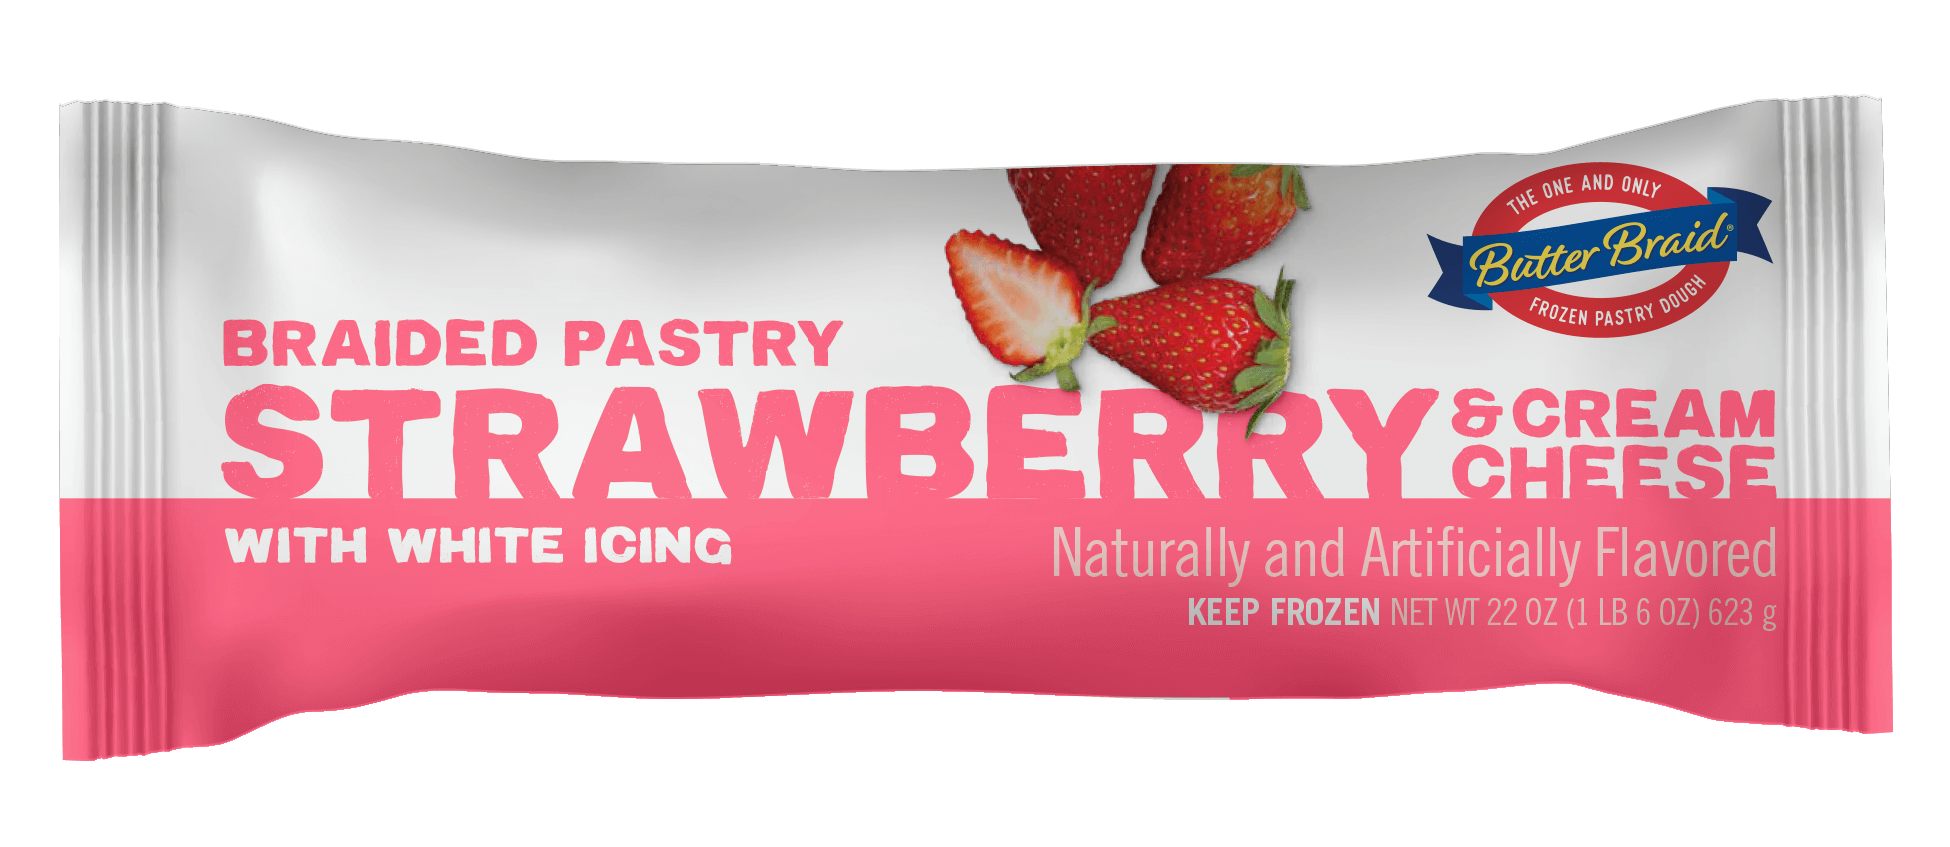 Strawberry & Cream Cheese Pastry packaging